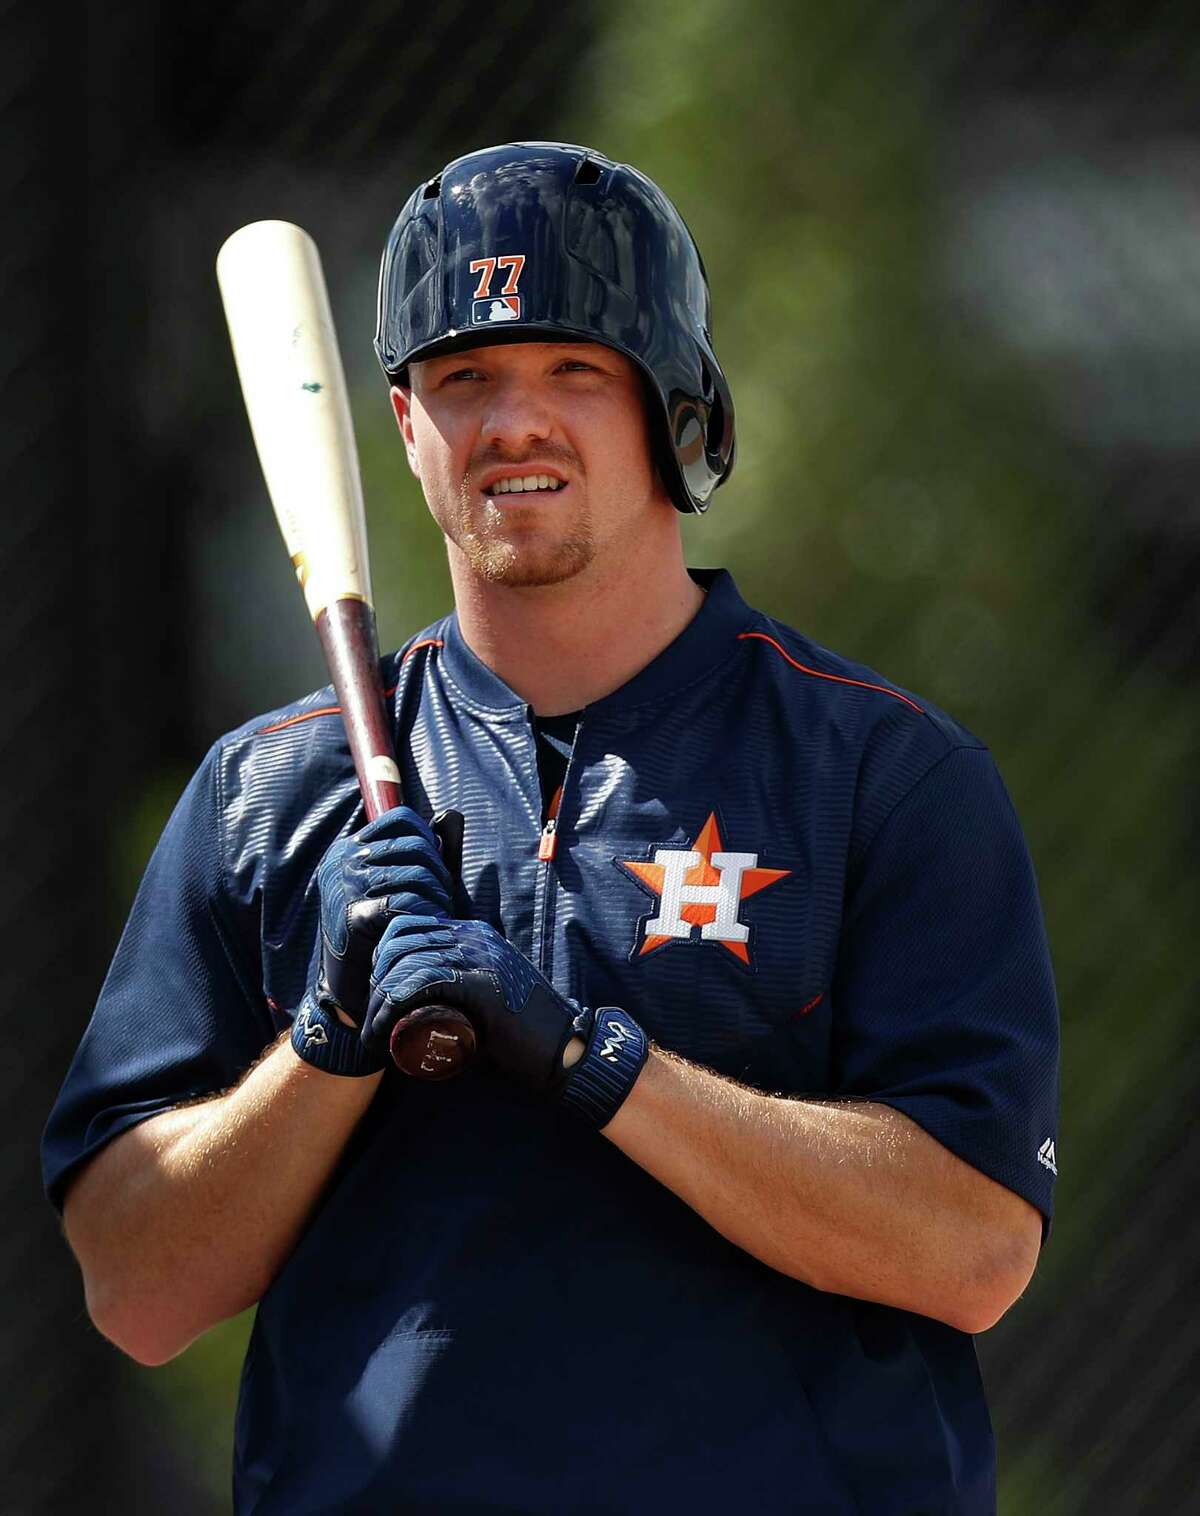 Houston Astros outfielder Derek Fisher (77) has stolen 10 bases in 10 tries during Spring Training. He is the first Astros player with double-digit steals in a spring training since Michael Bourn swiped 13 in 2009.